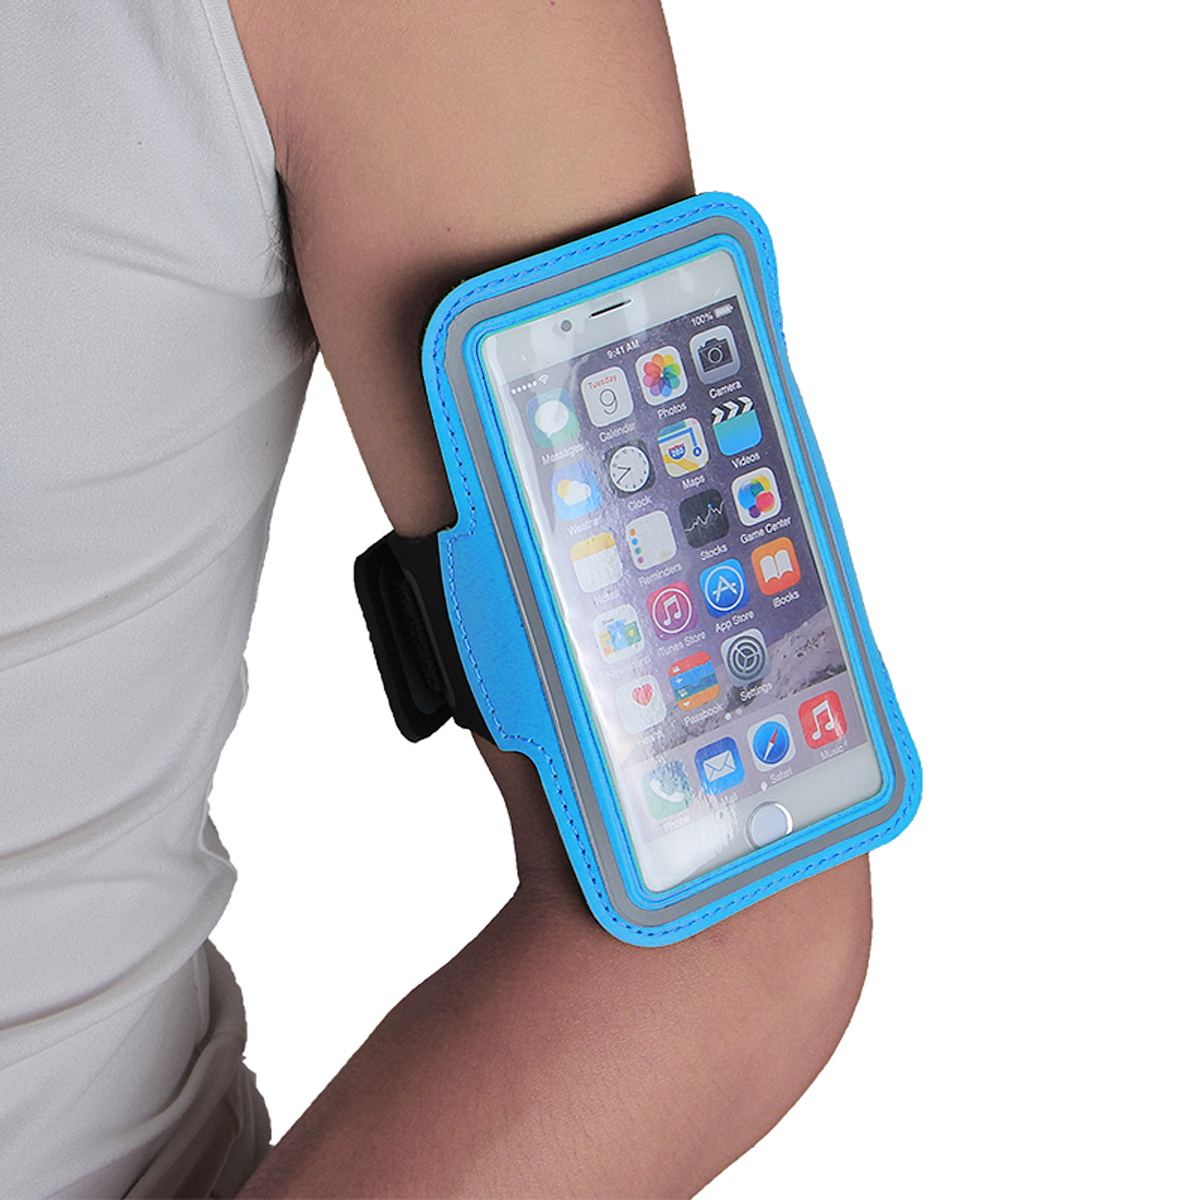 Universal-Sports-Elastic-Armband-Sweatproof-Touch-Screen-Mobile-Phone-Arm-Bags-with-Earphone-Port-fo-1890480-11